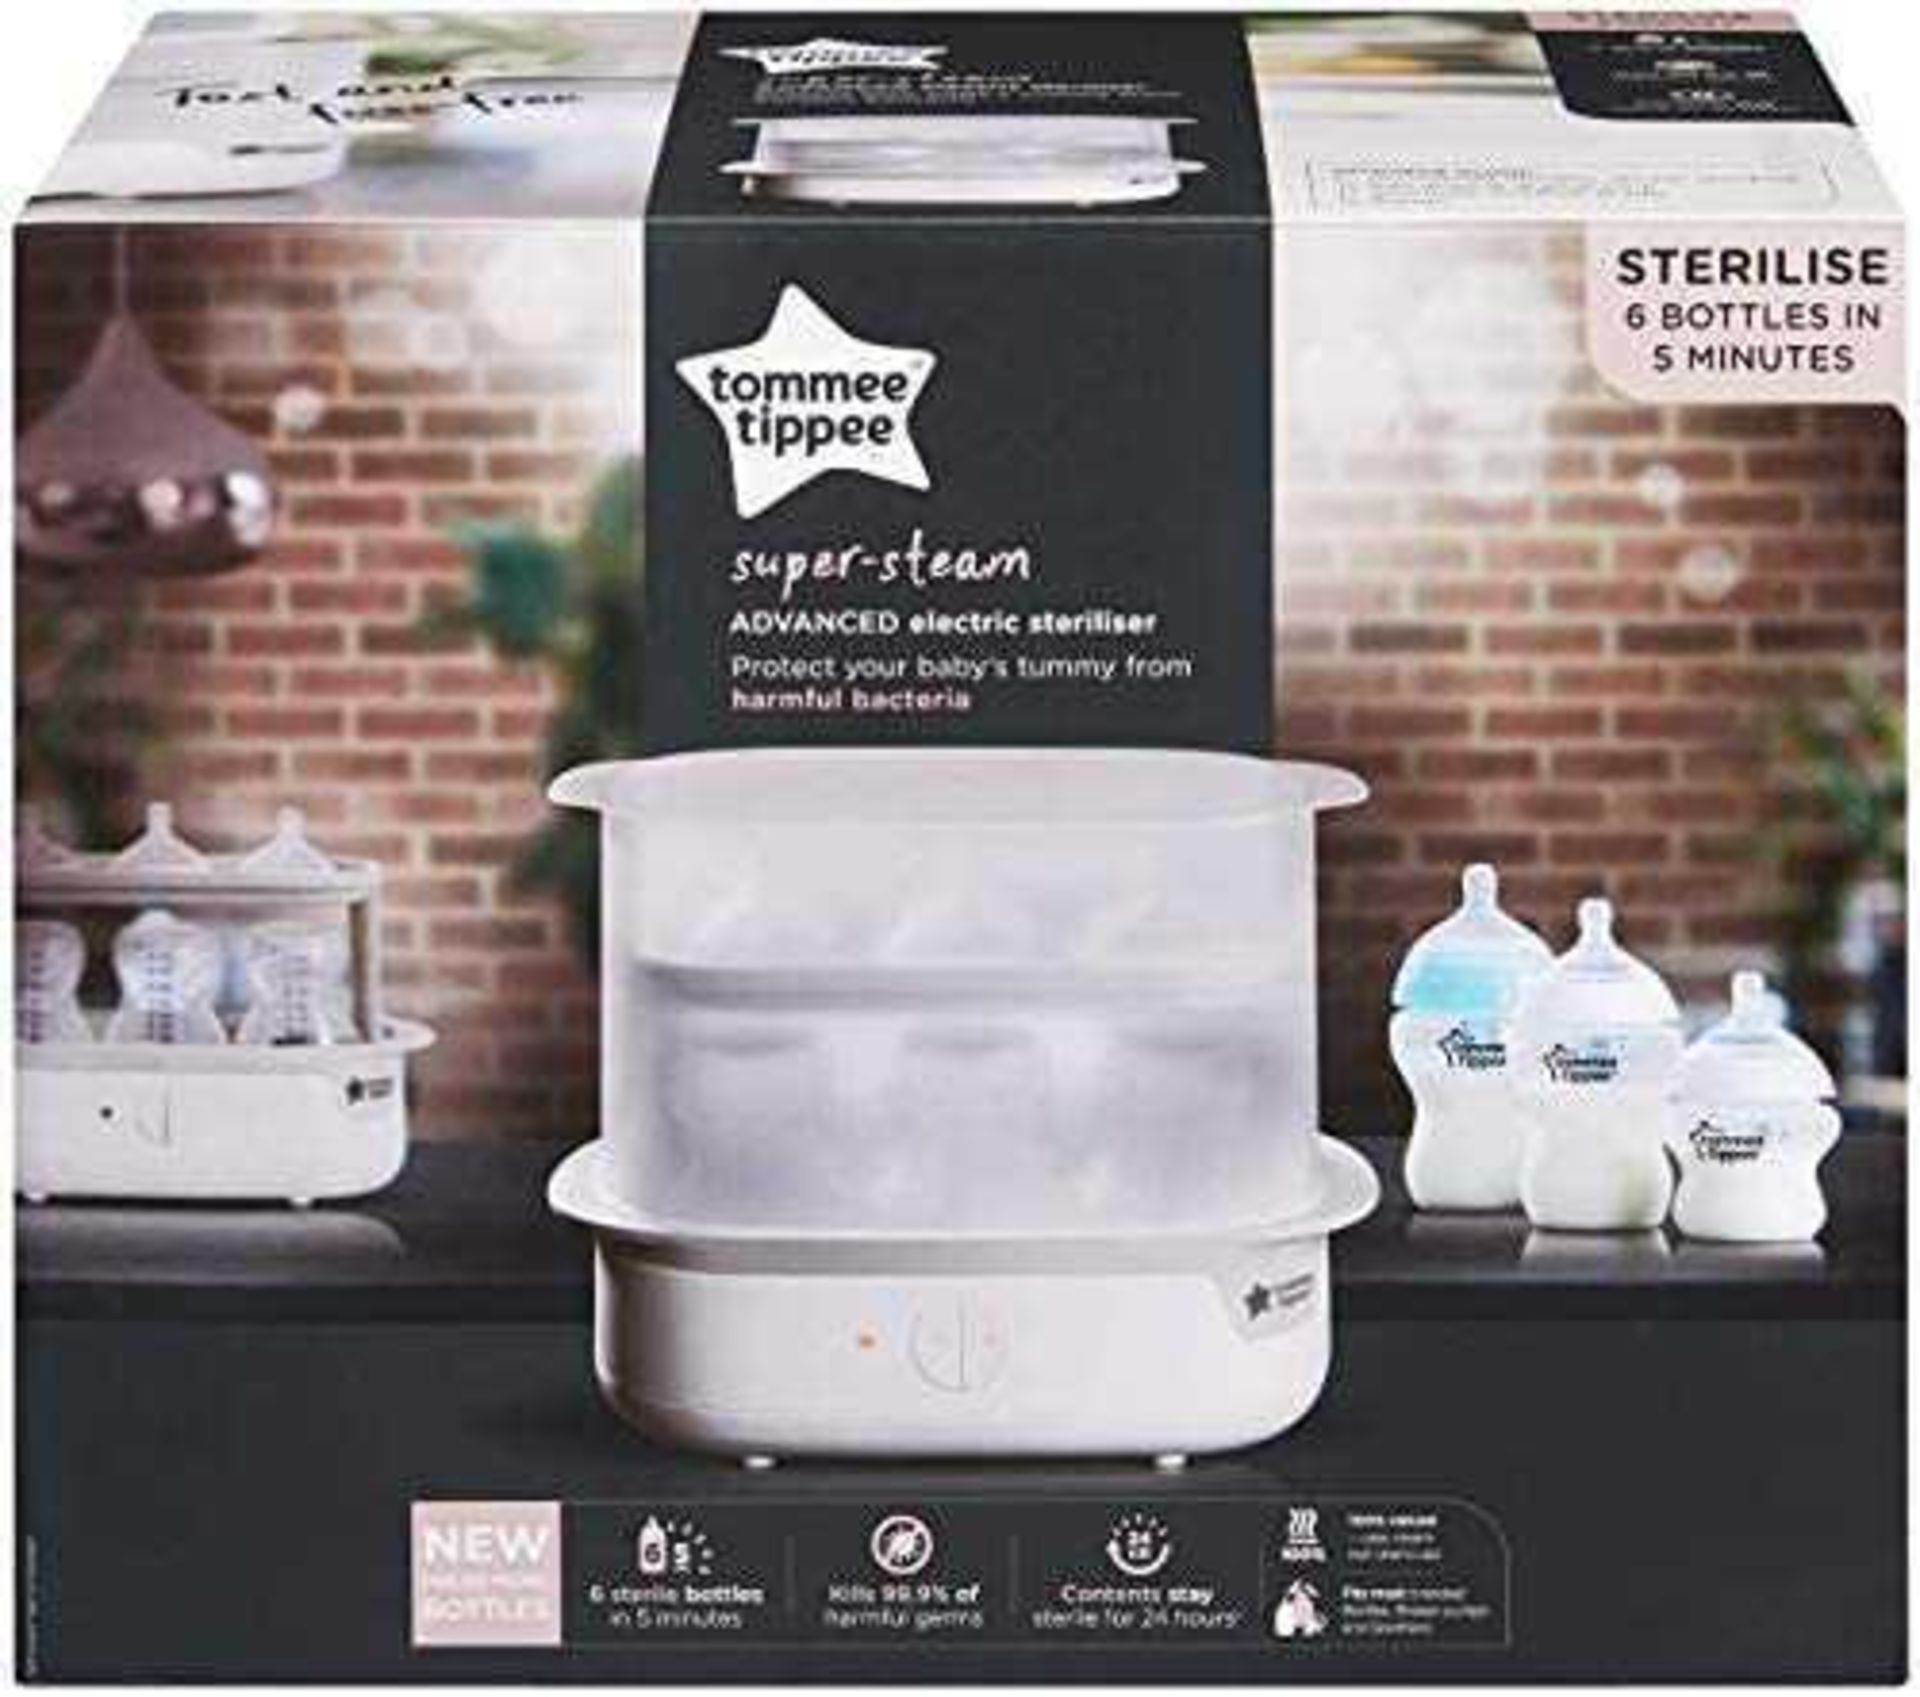 Rrp £80 Boxed Tommee Tippee Super Steam Advanced Electric Steriliser